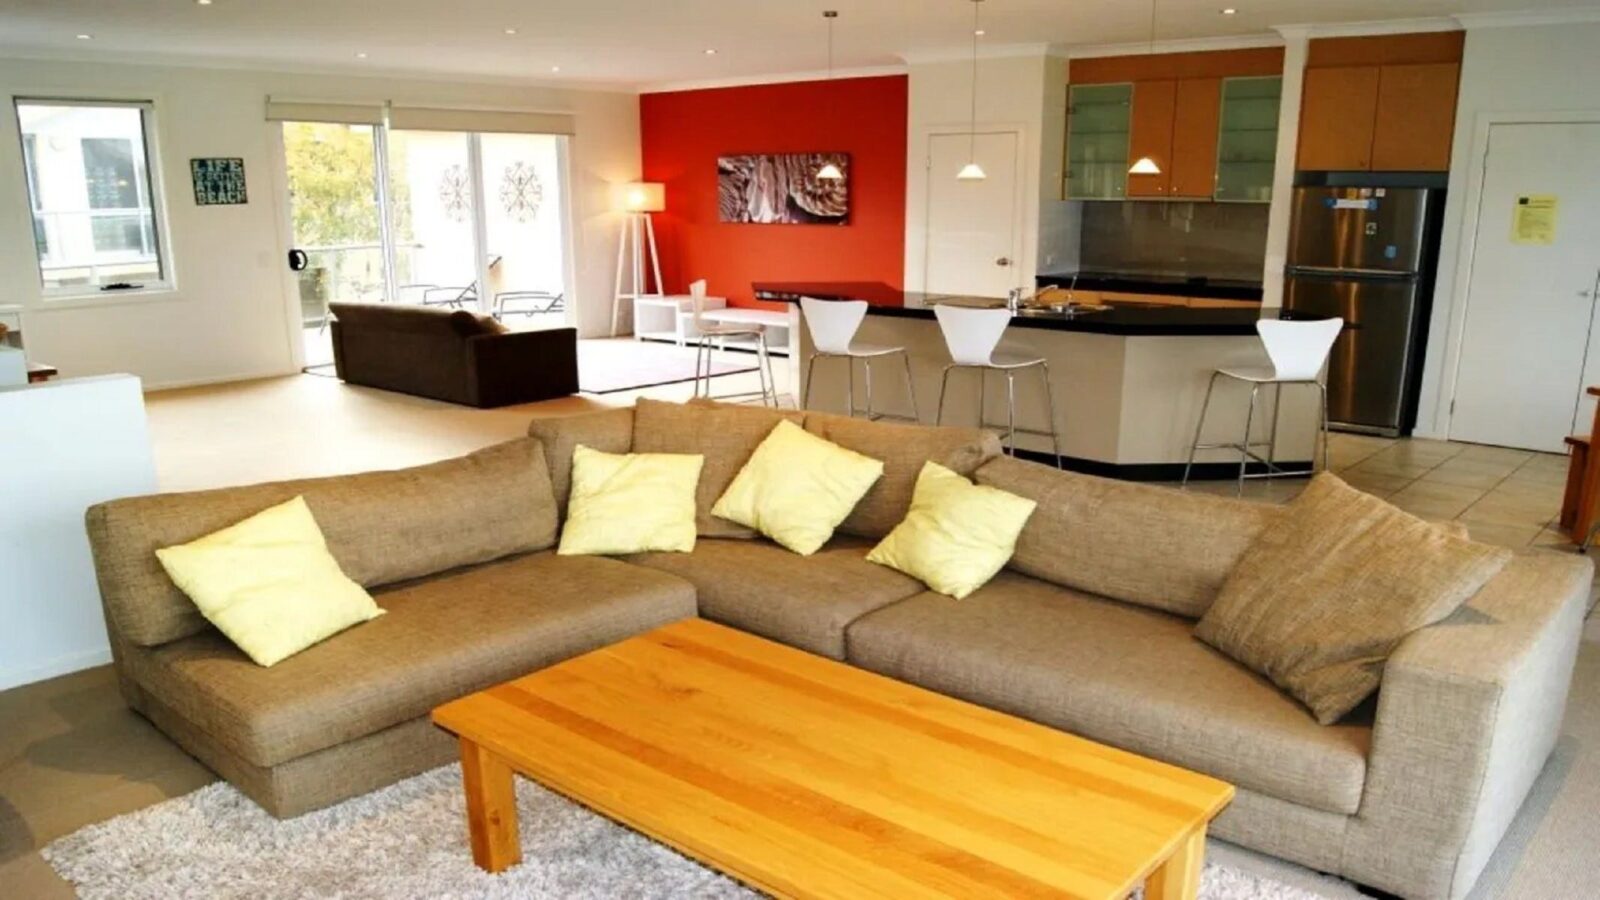 Image of living area with corner couch with kitchen meals area behind and sliding doors to balcony